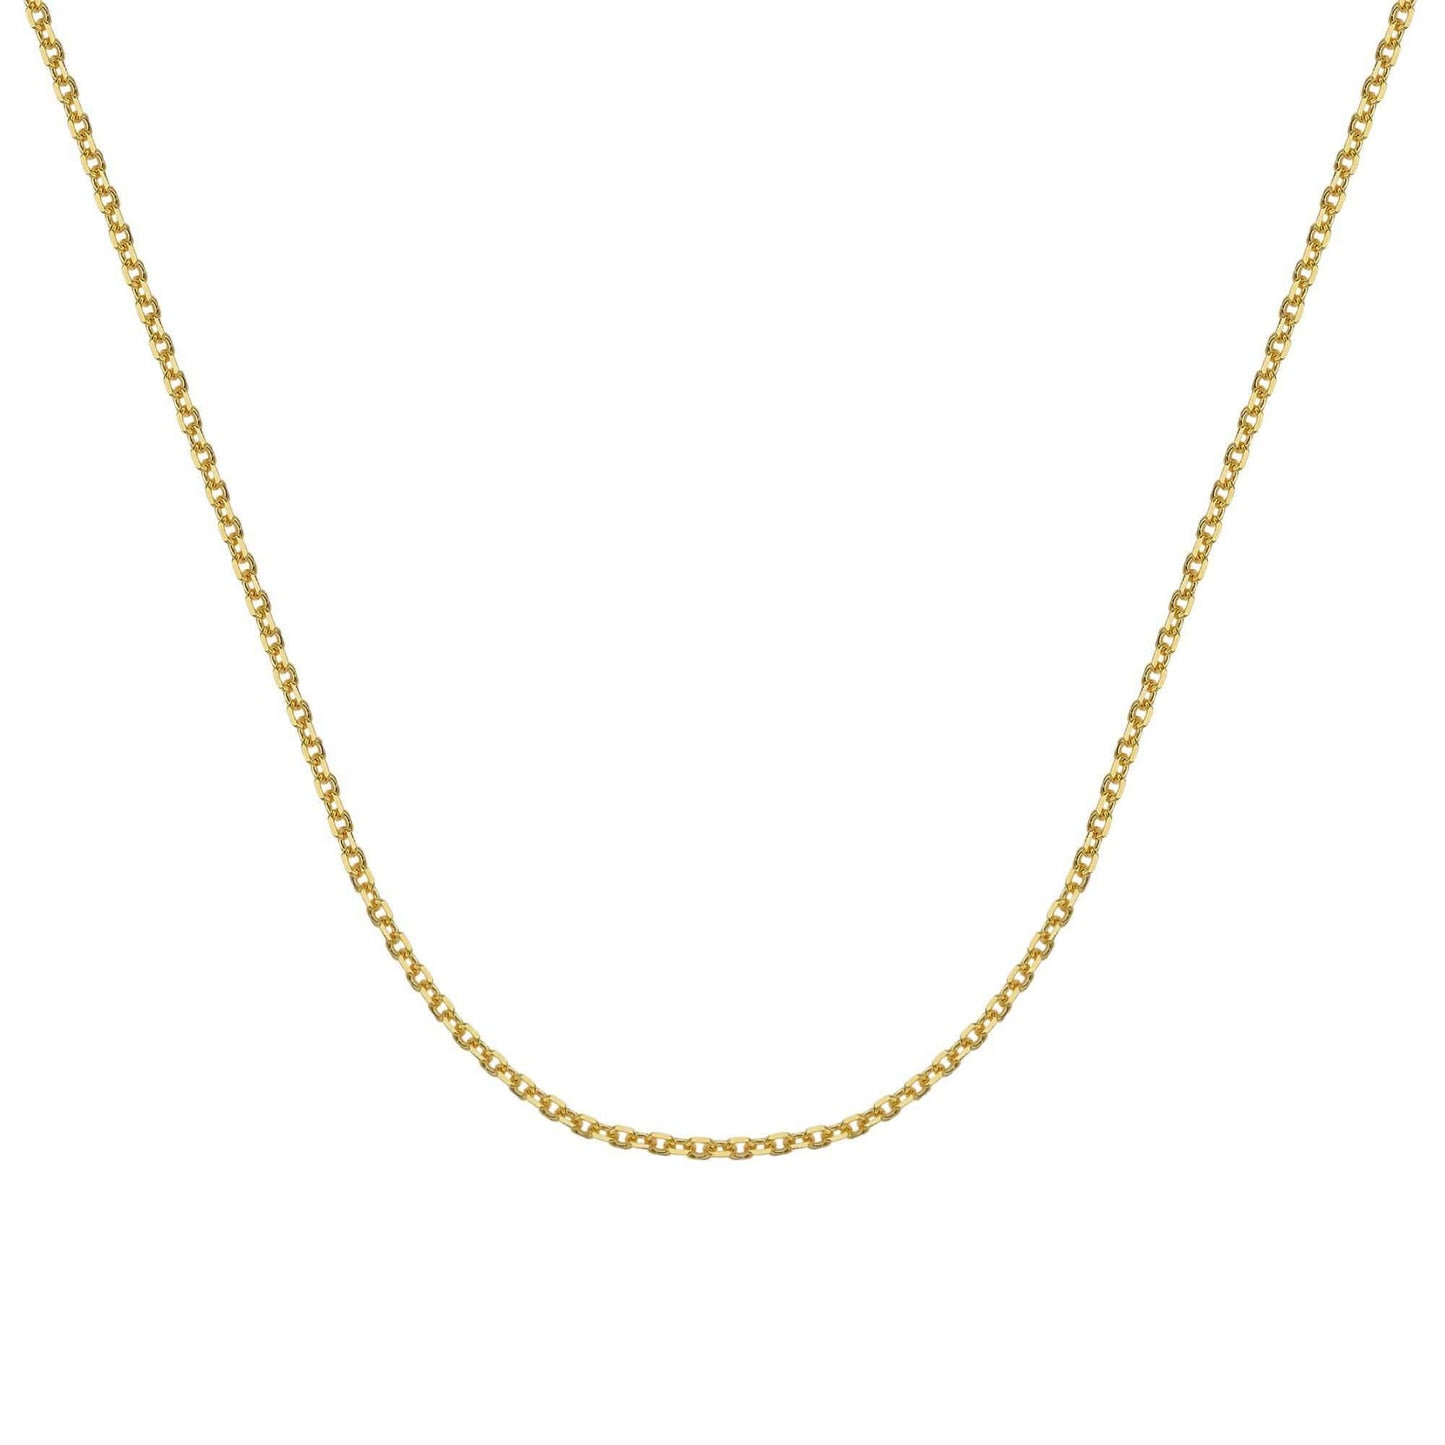 14K Gold 1.80 mm Diamond Cut Cable Chain with Lobster Claw Clasp